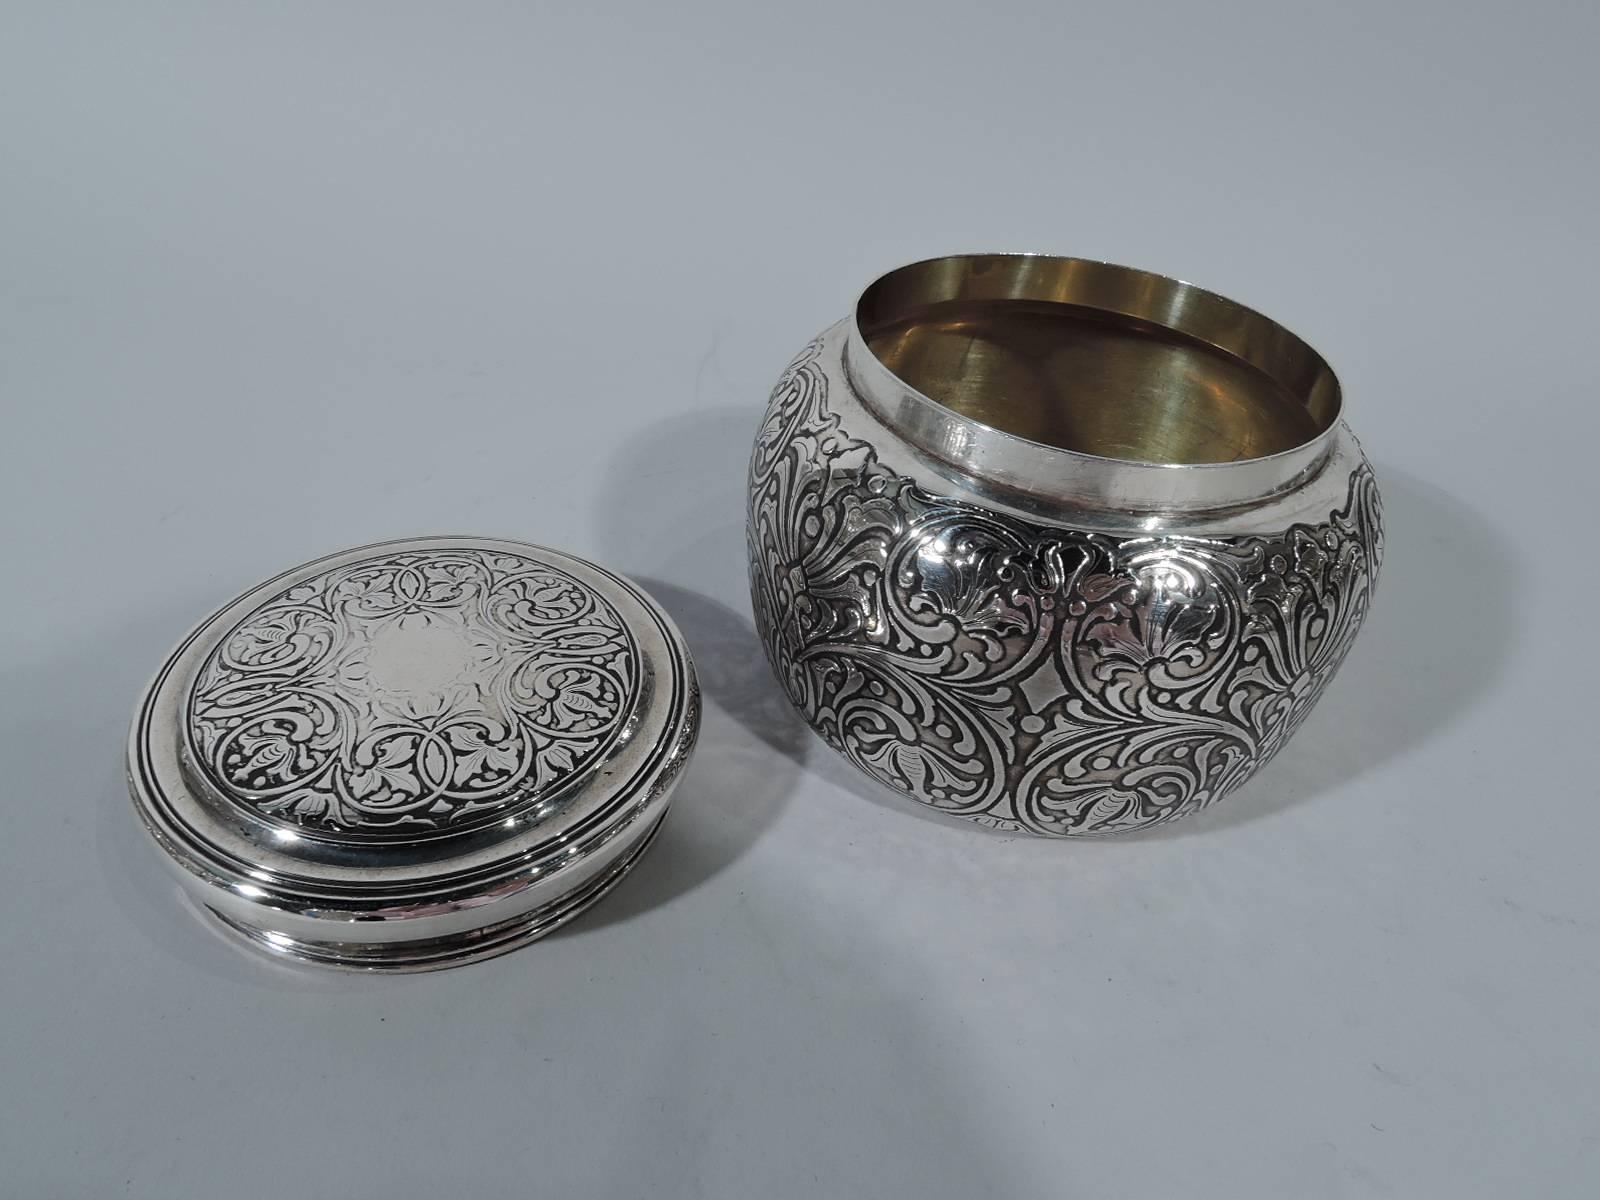 Art Nouveau sterling silver powder jar. Made by Tiffany in New York, circa 1908. Curved sides and snugly-fitted flat cover. Dense and stylized repeating scroll-and-flower design. Gilt-washed interior. A pretty period piece. Hallmark includes pattern